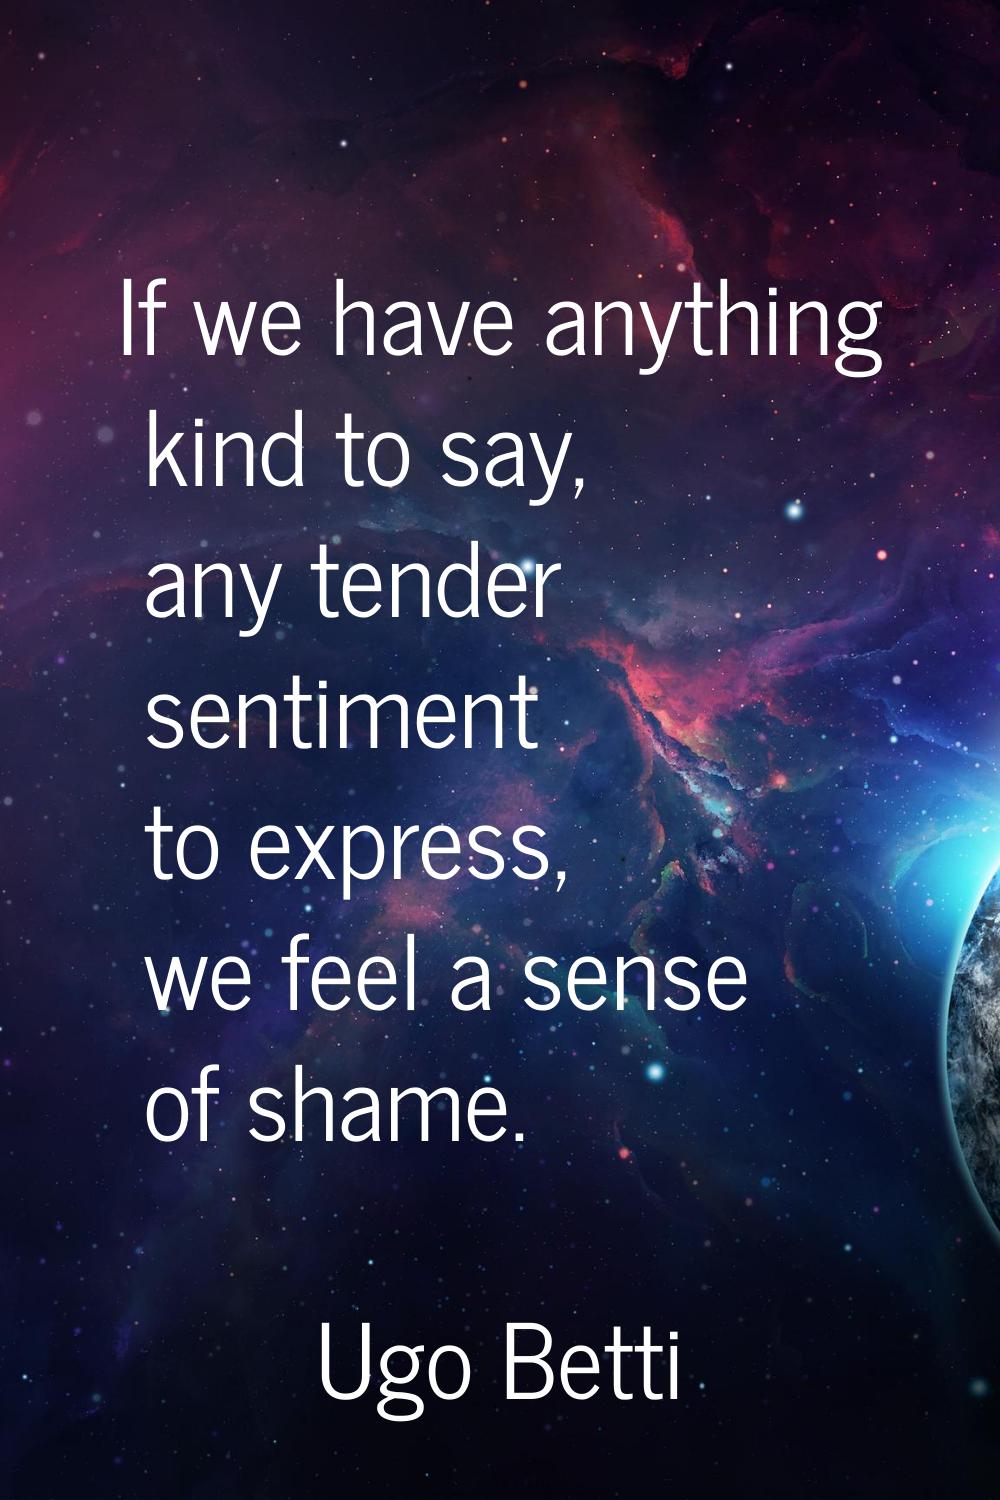 If we have anything kind to say, any tender sentiment to express, we feel a sense of shame.